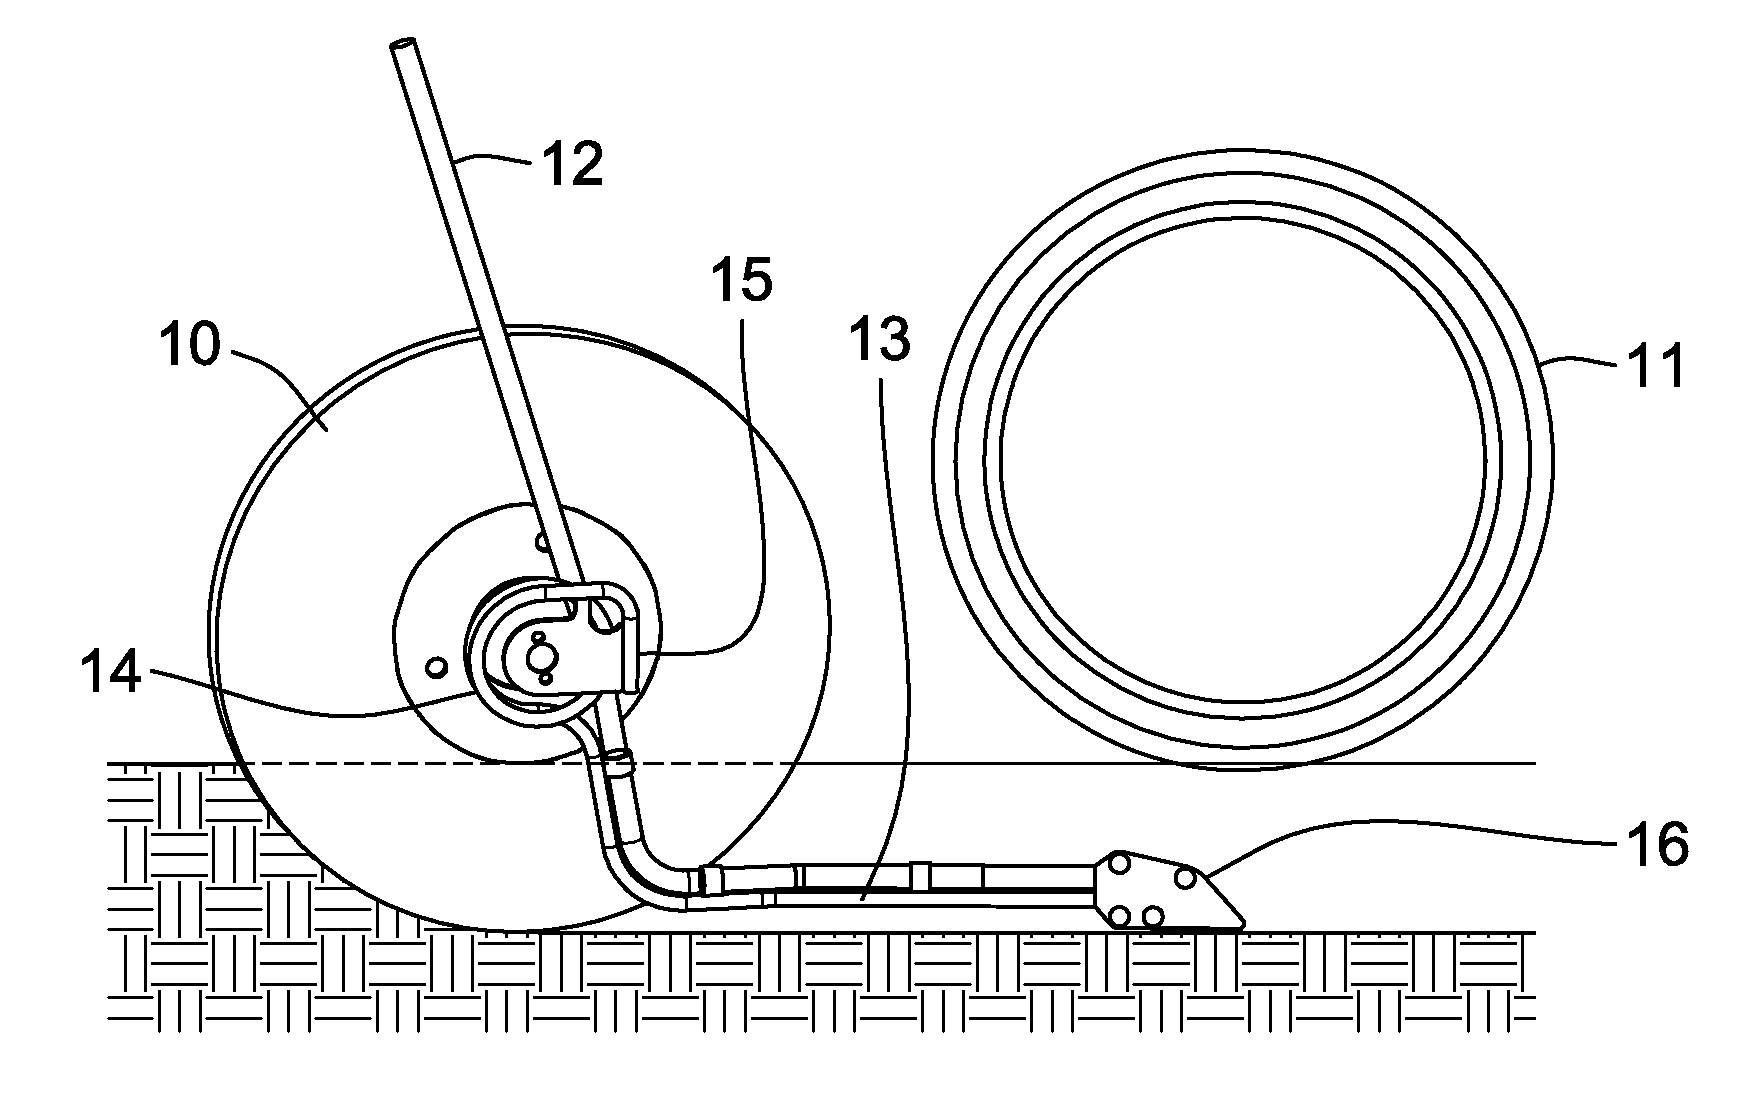 Agricultural implement having fluid delivery features